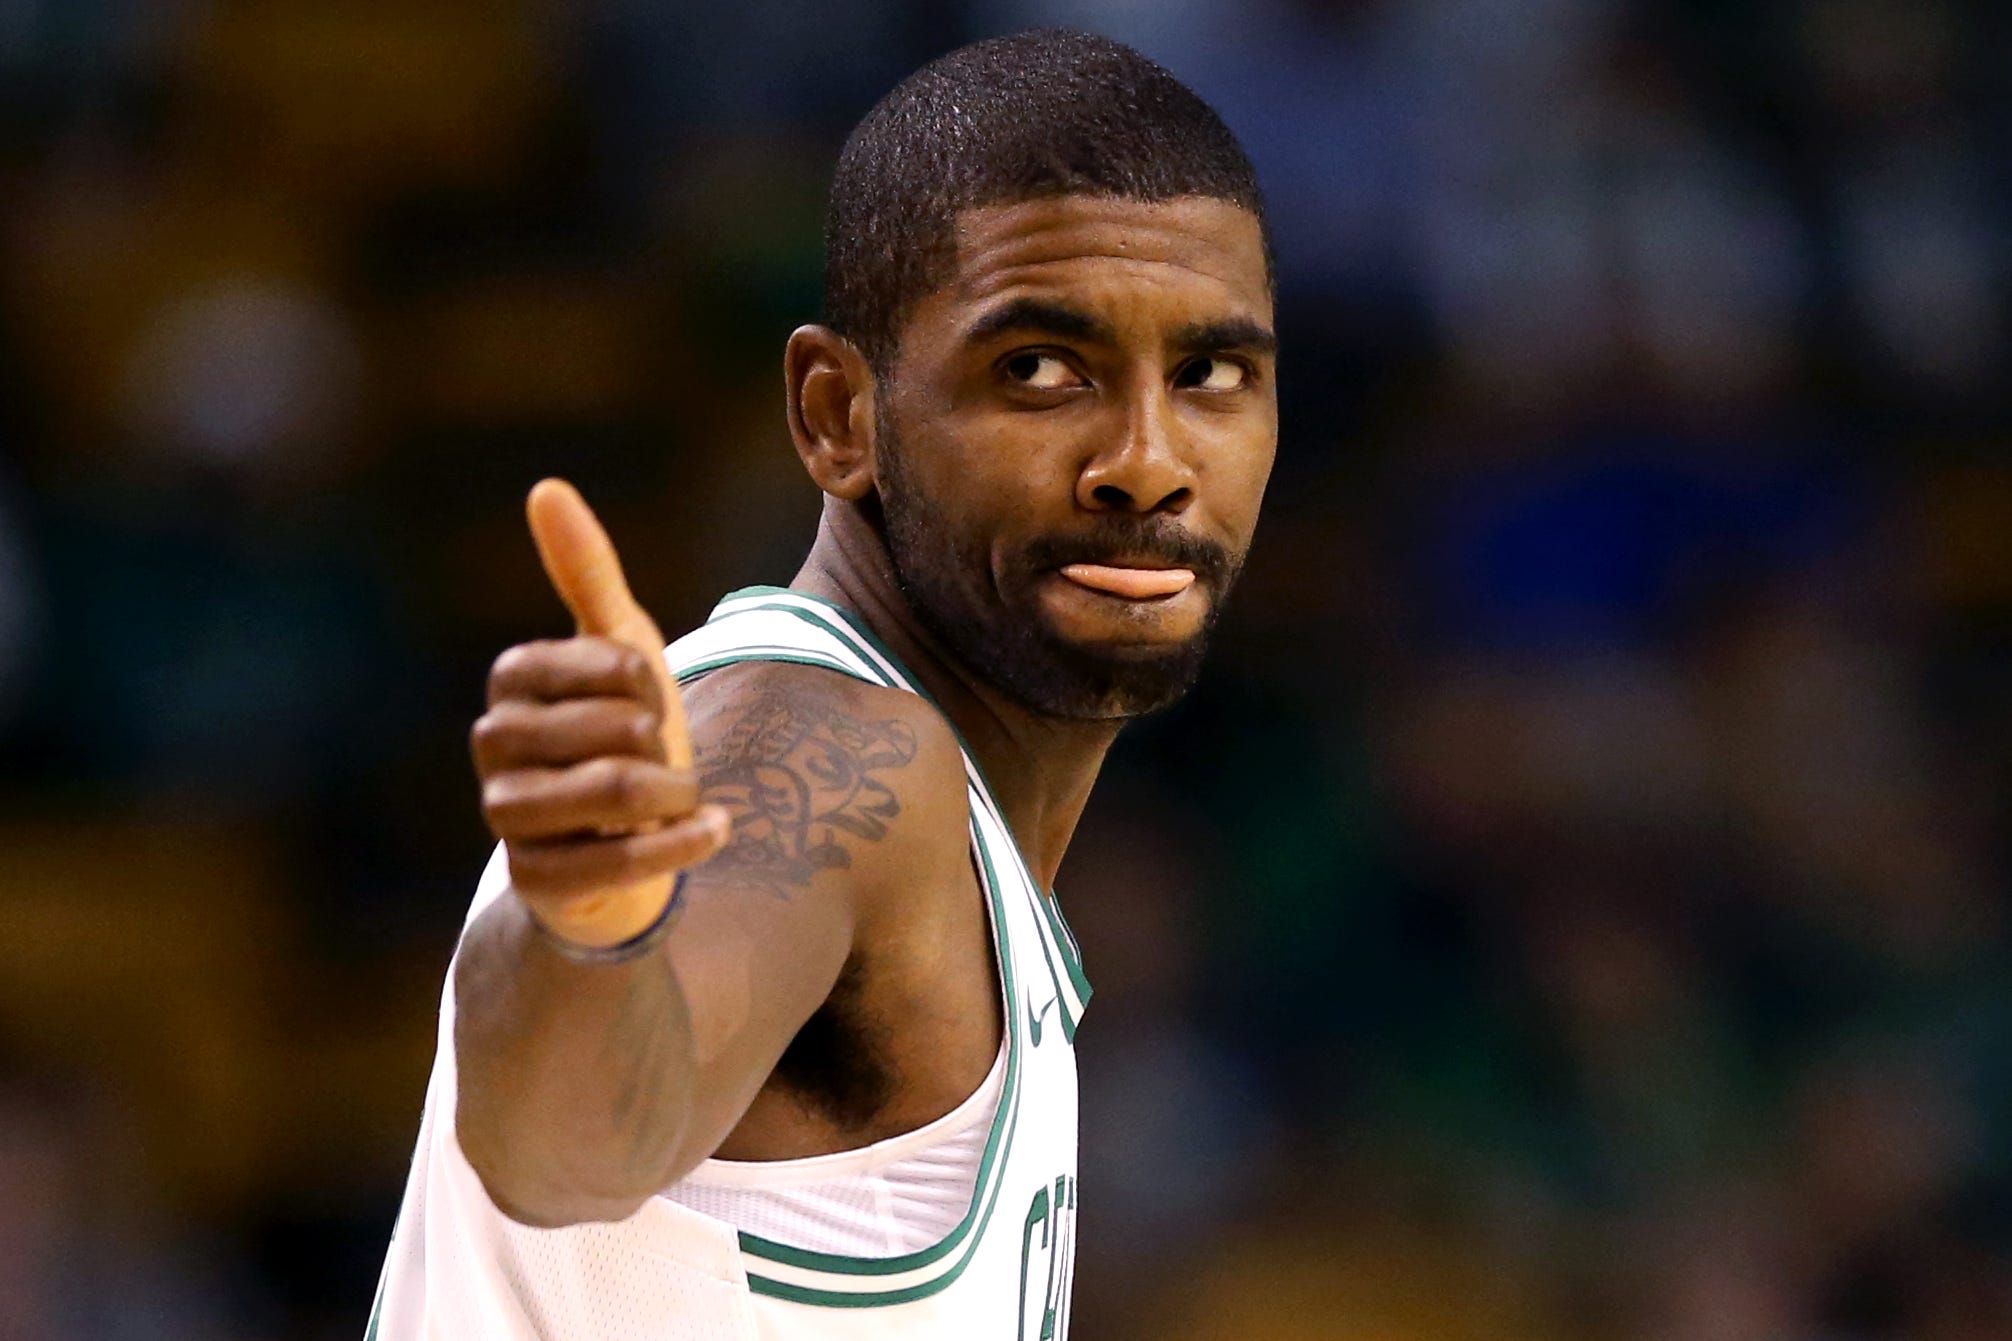 earth is flat kyrie irving